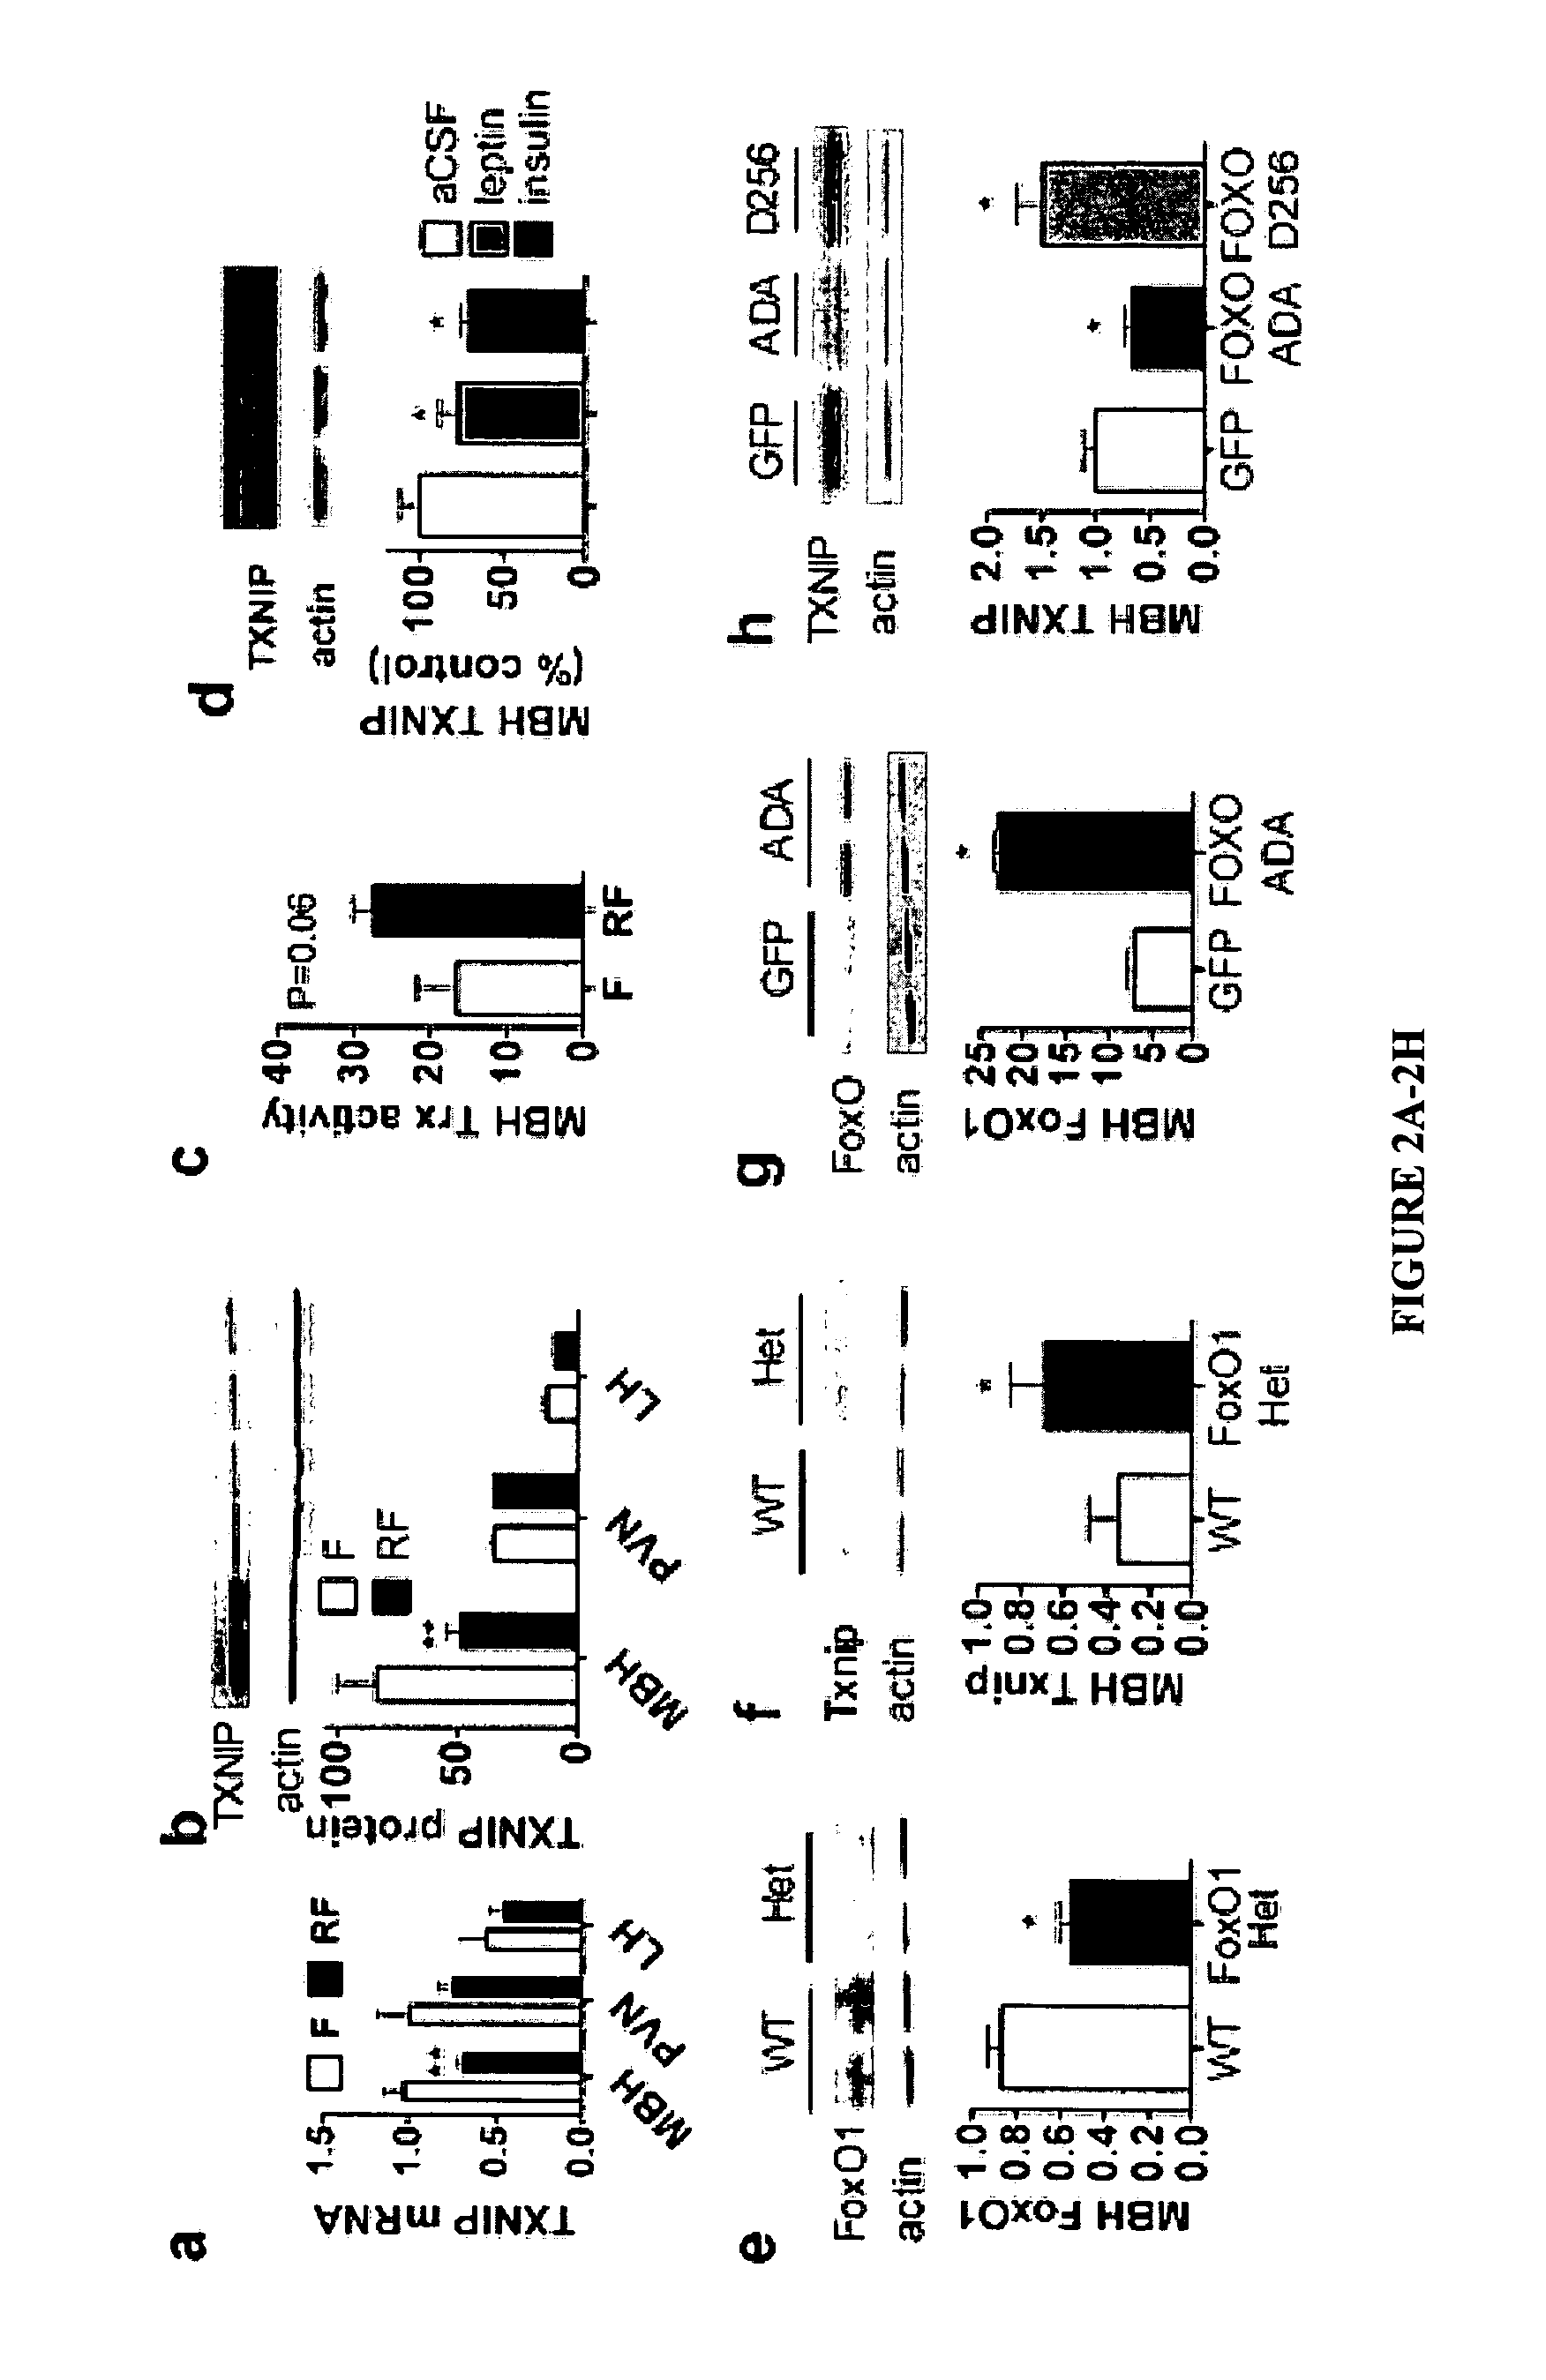 Methods and assays for treating or preventing obesity and/or diabetes or increasing insulin sensitivity